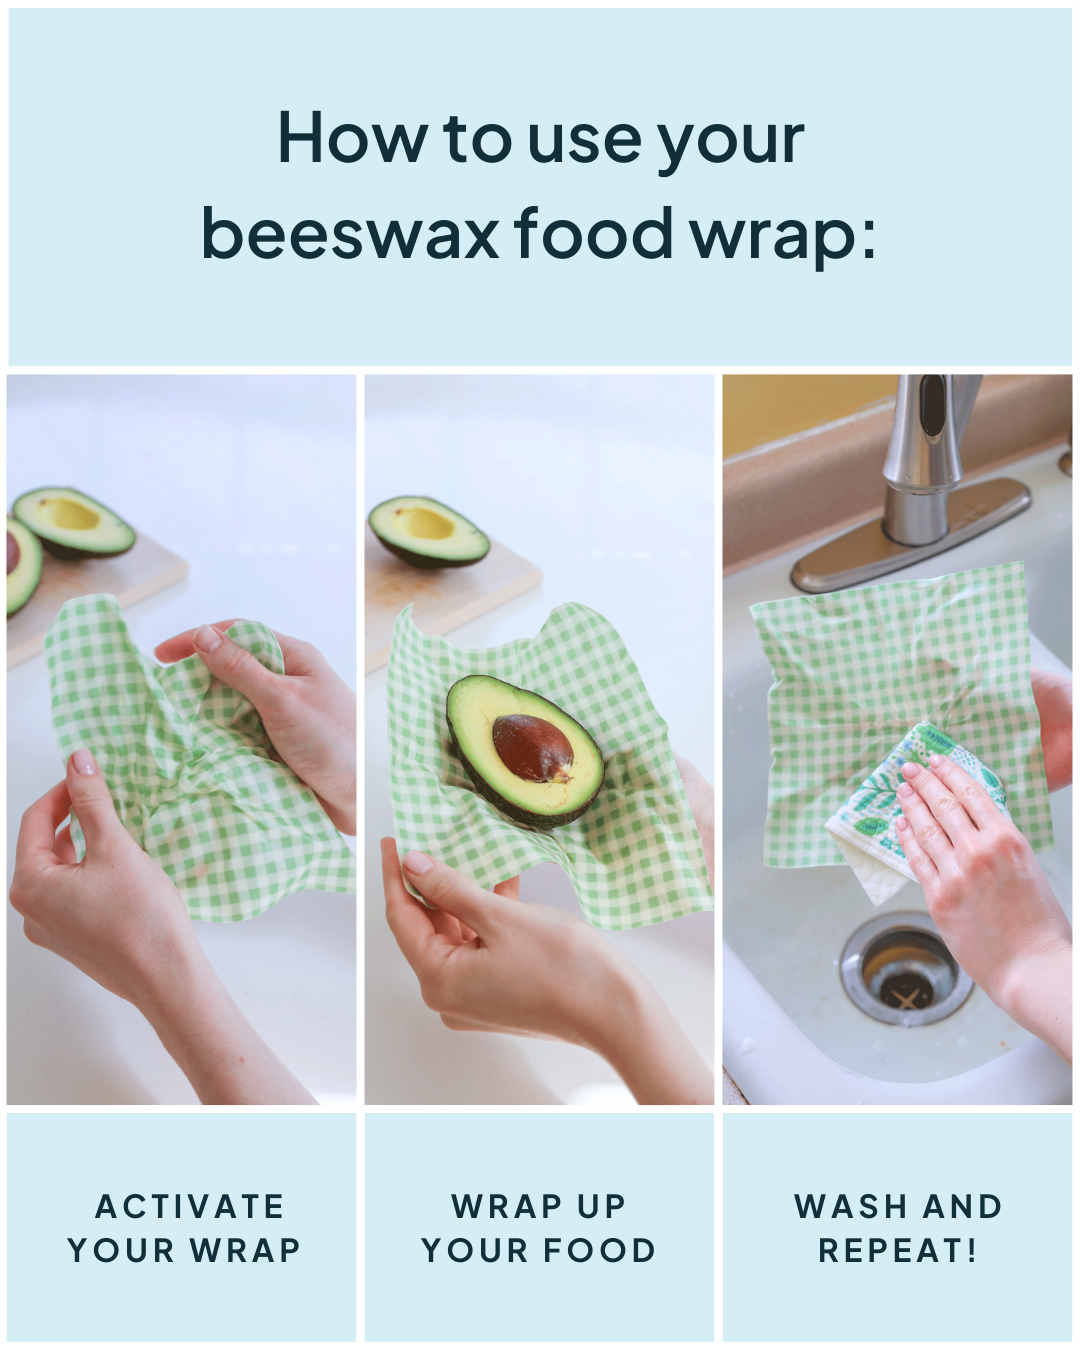 Beeswax Wrap Variety Set - Green | Nature Bee